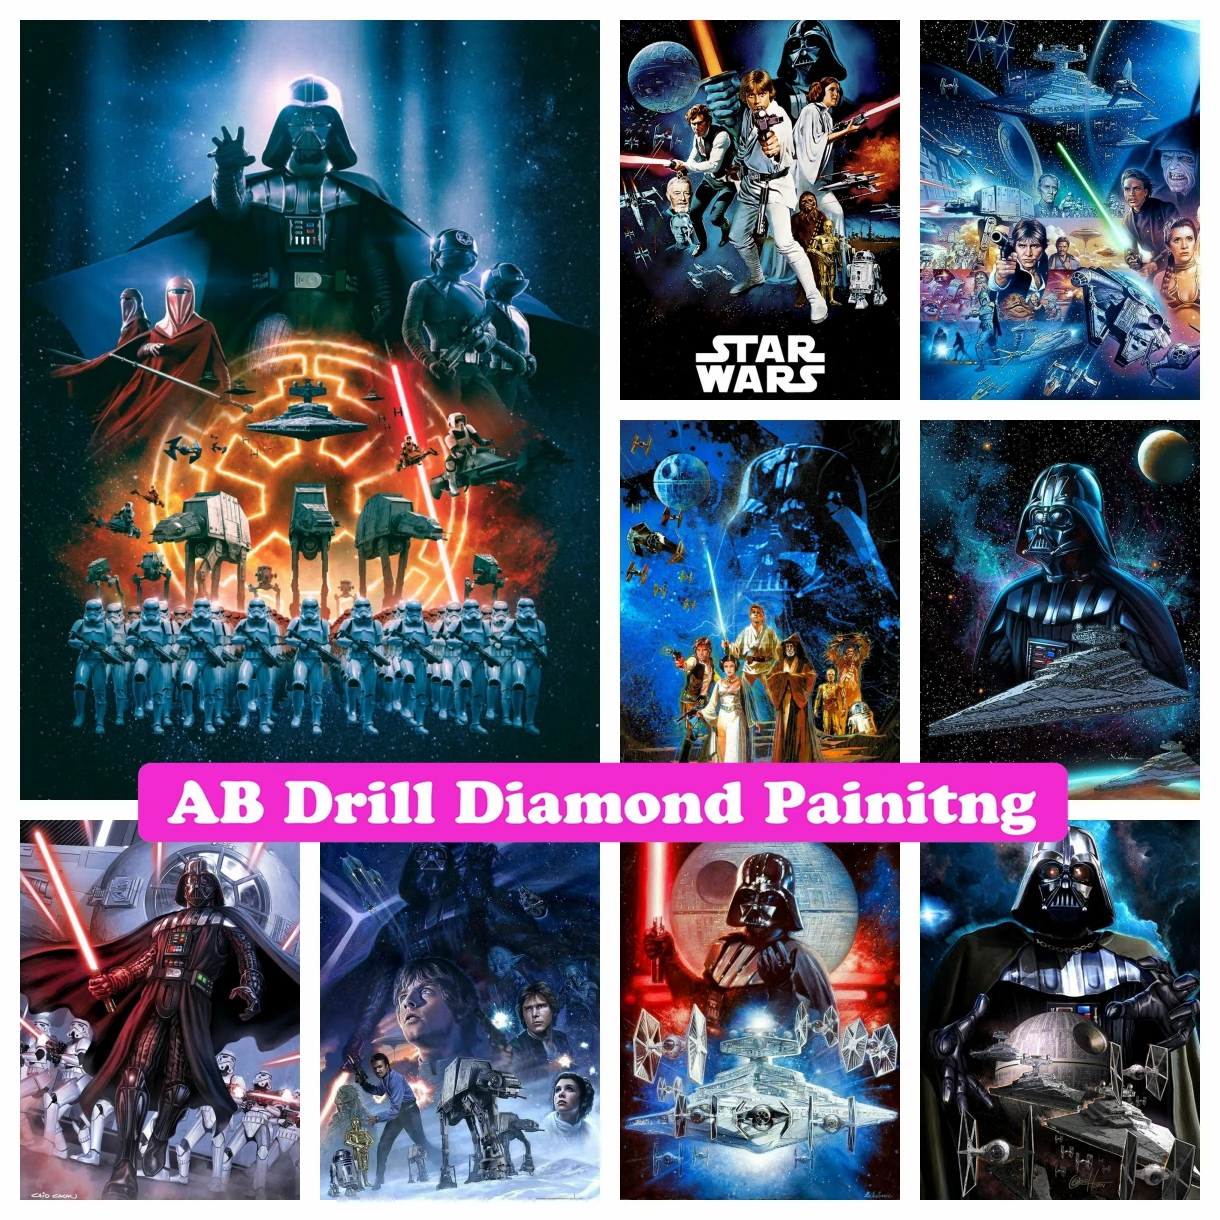 

Star Wars Darth Vader 5D DIY AB Drill Diamond Painting Mosaic Embroidery Disney Pictures of Rhinestones Cross Stitch Home Decor